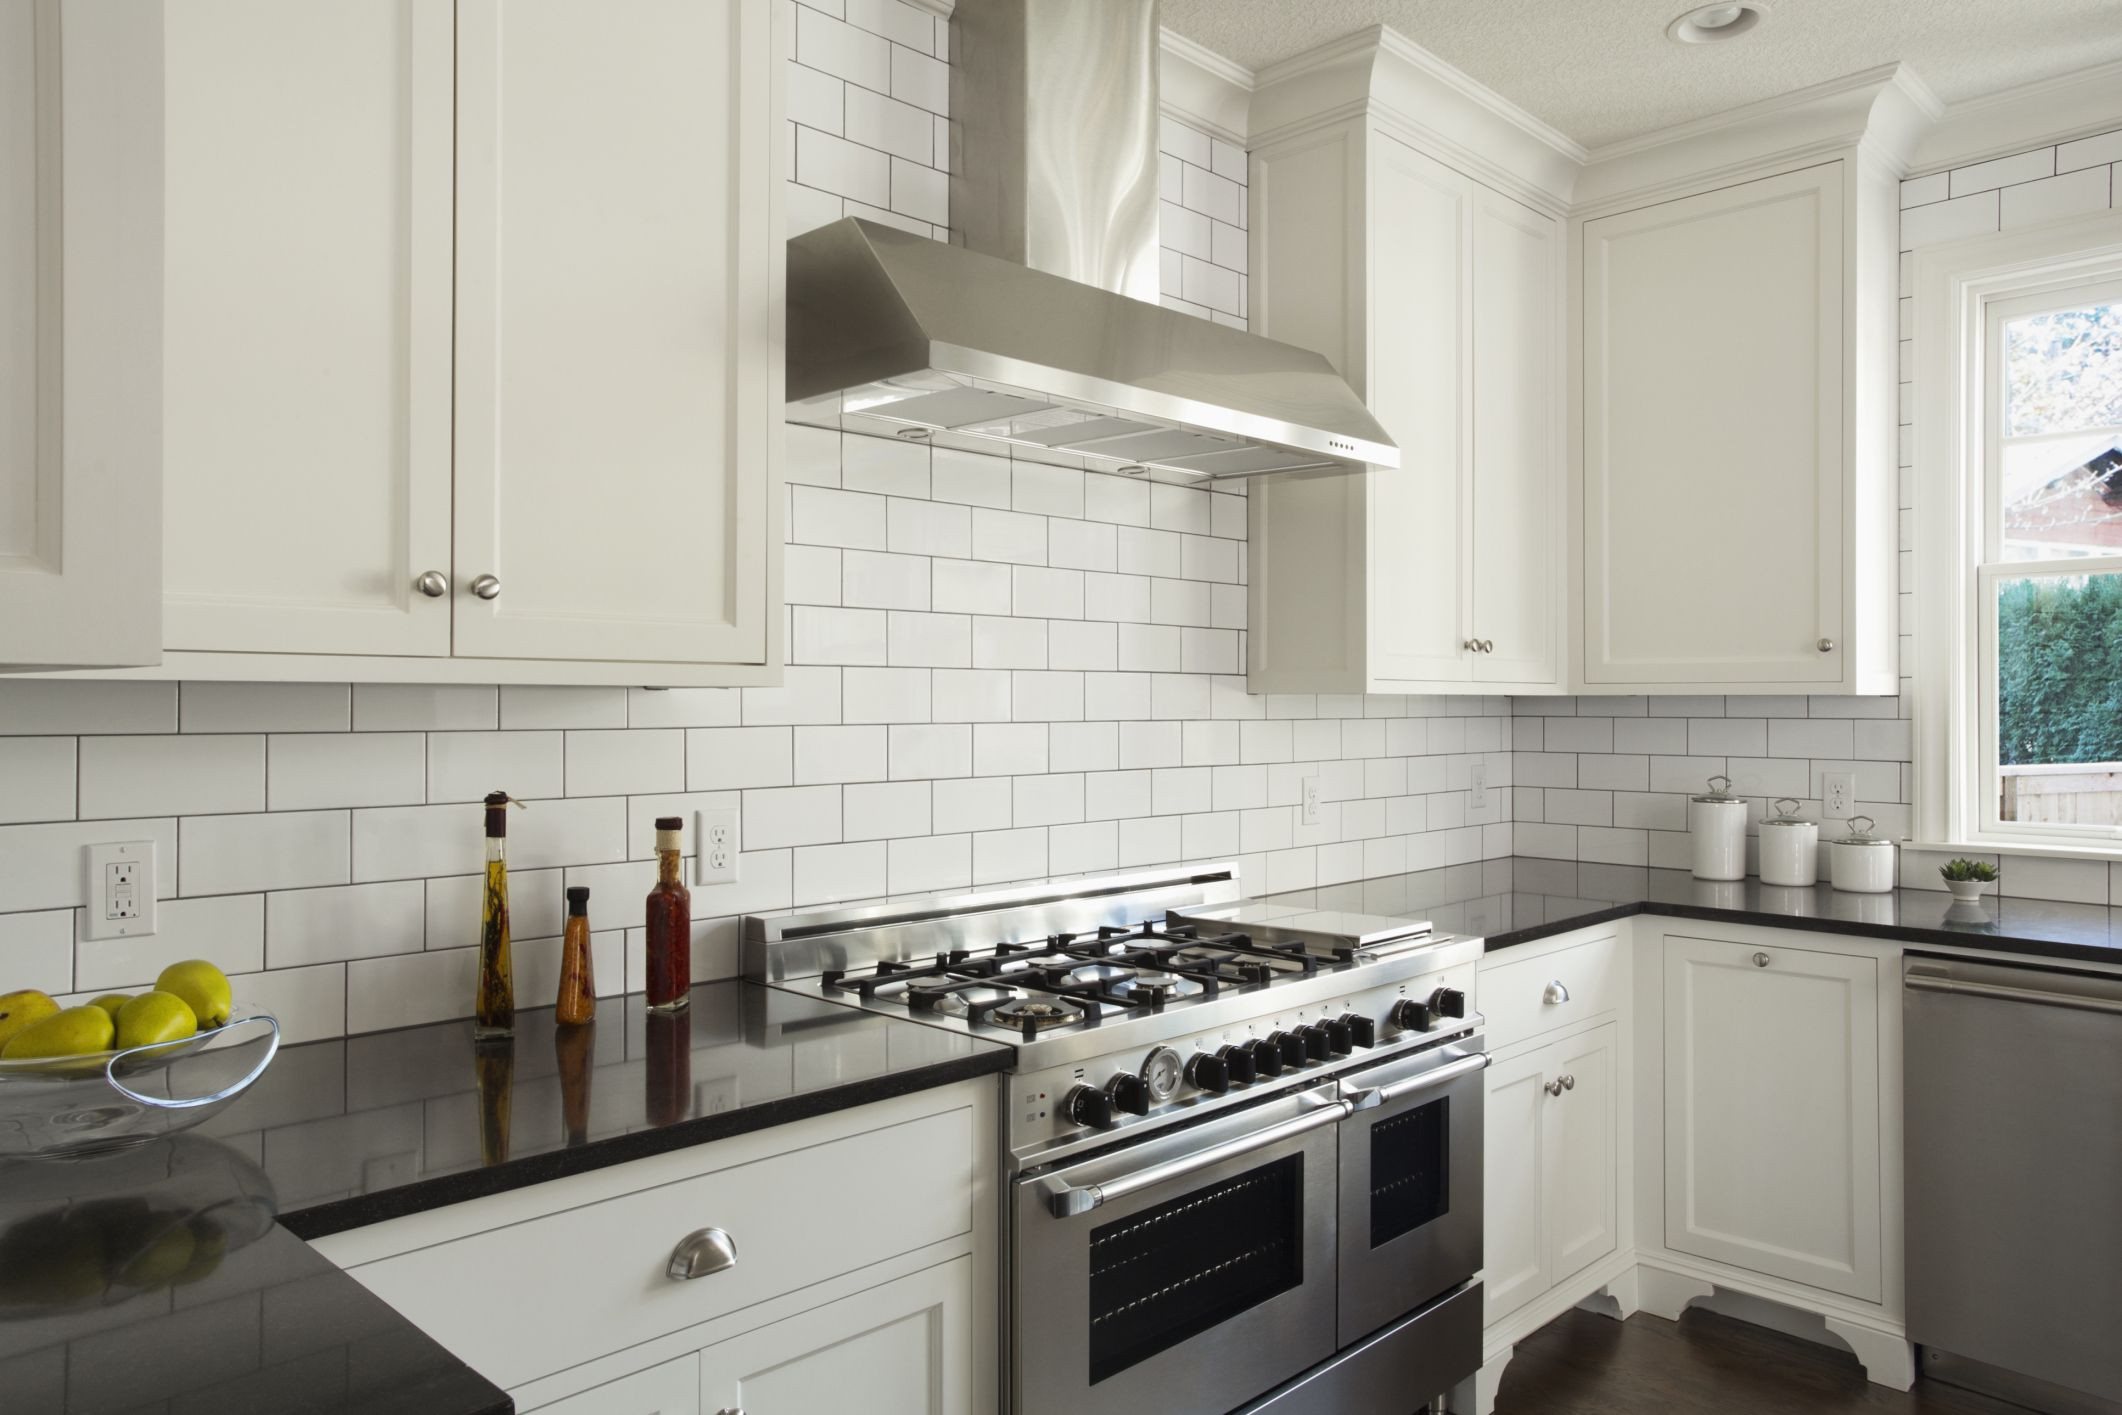 Subway Tile For Kitchen
 How Subway Tile Can Effectively Work in Modern Rooms